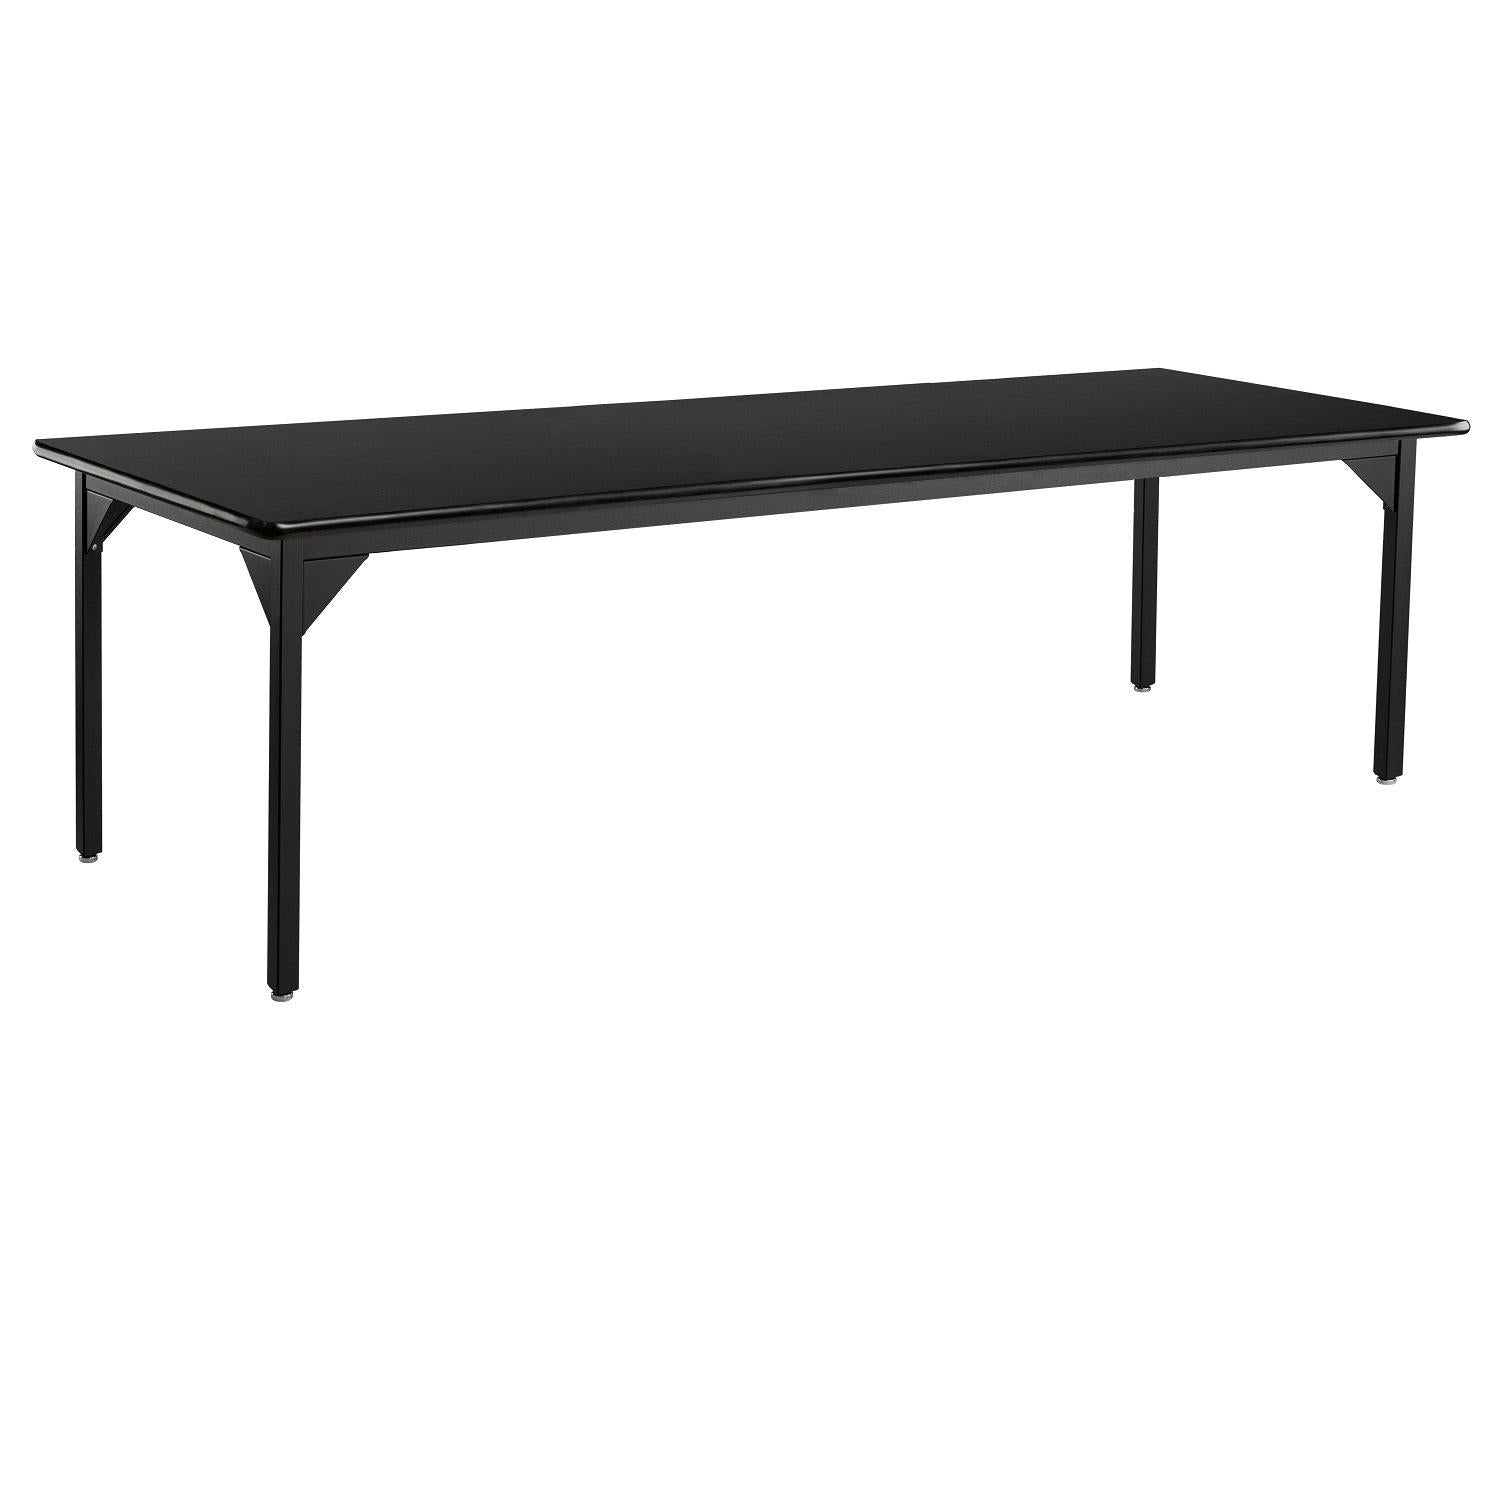 Heavy-Duty Fixed Height Utility Table, Black Frame, 48" x 96", High-Pressure Laminate Top with T-Mold Edge